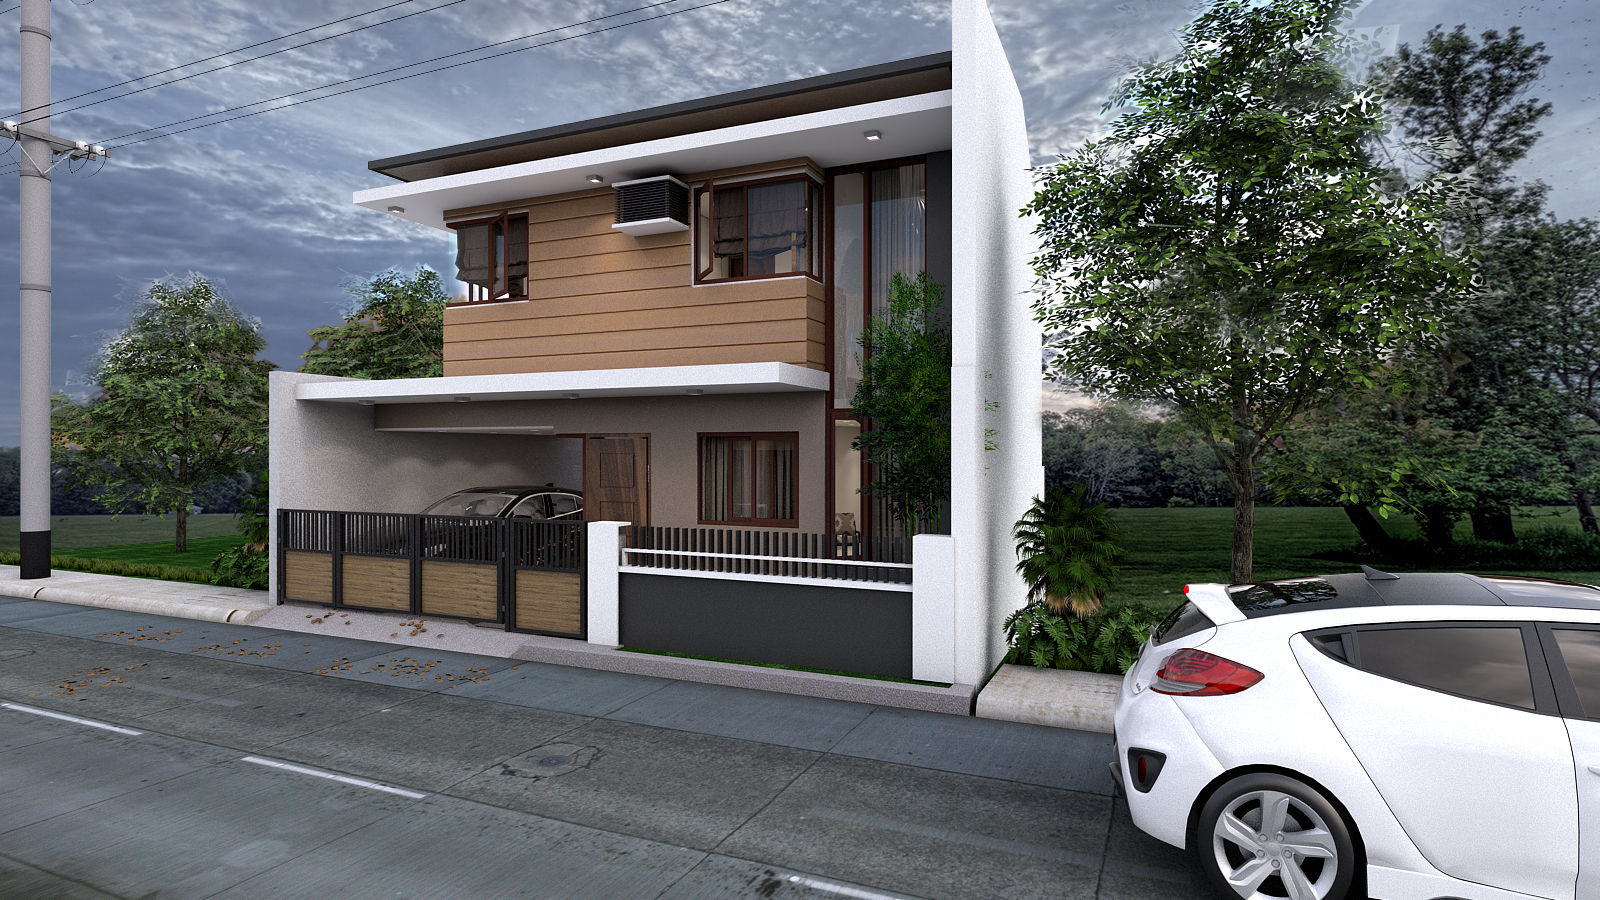 Brand new 2 storey house - Exterior and Surrounding homify Multi-Family house